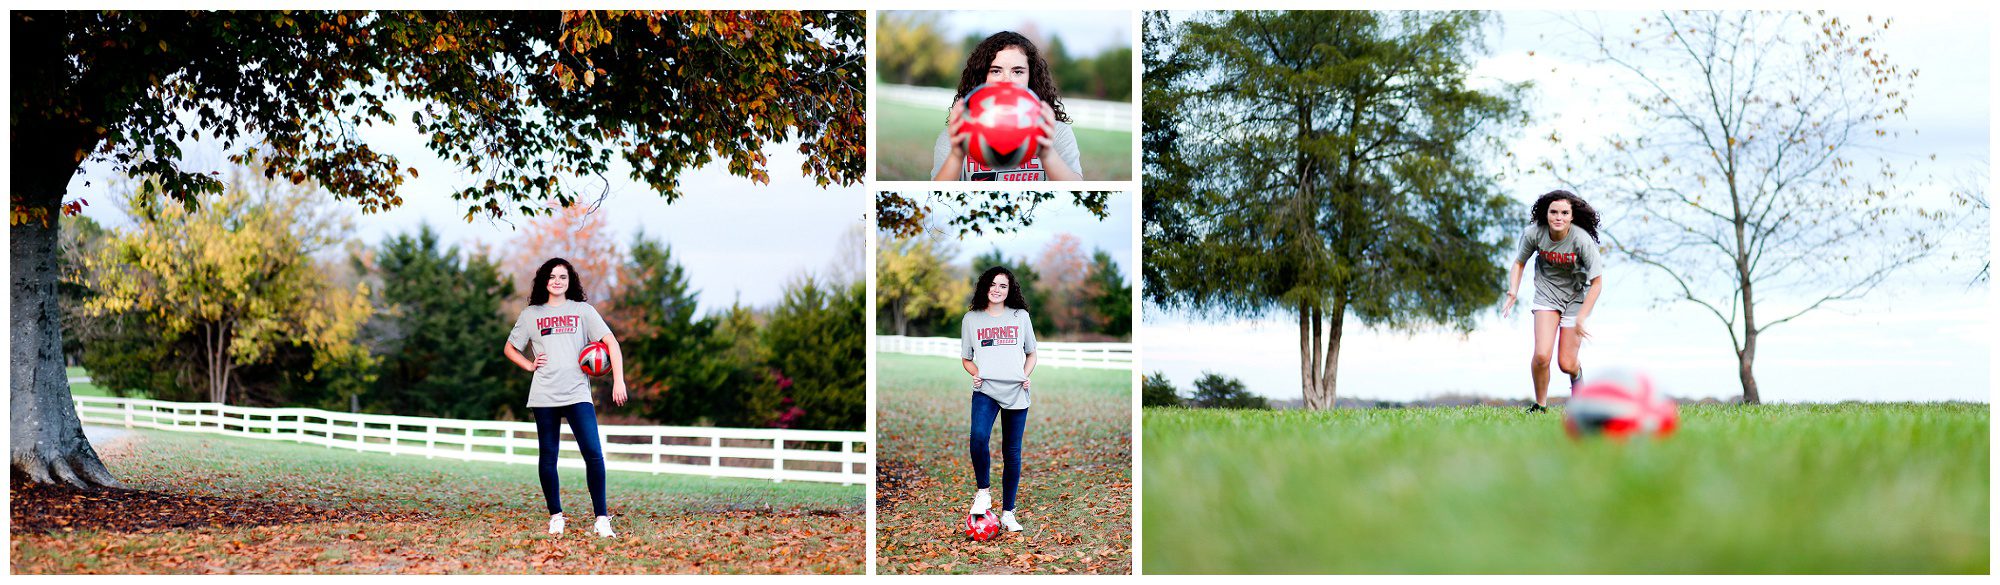 charlottesville senior portraits monticello high school MHS 2018 photographer pictures silhouette soccer teenager